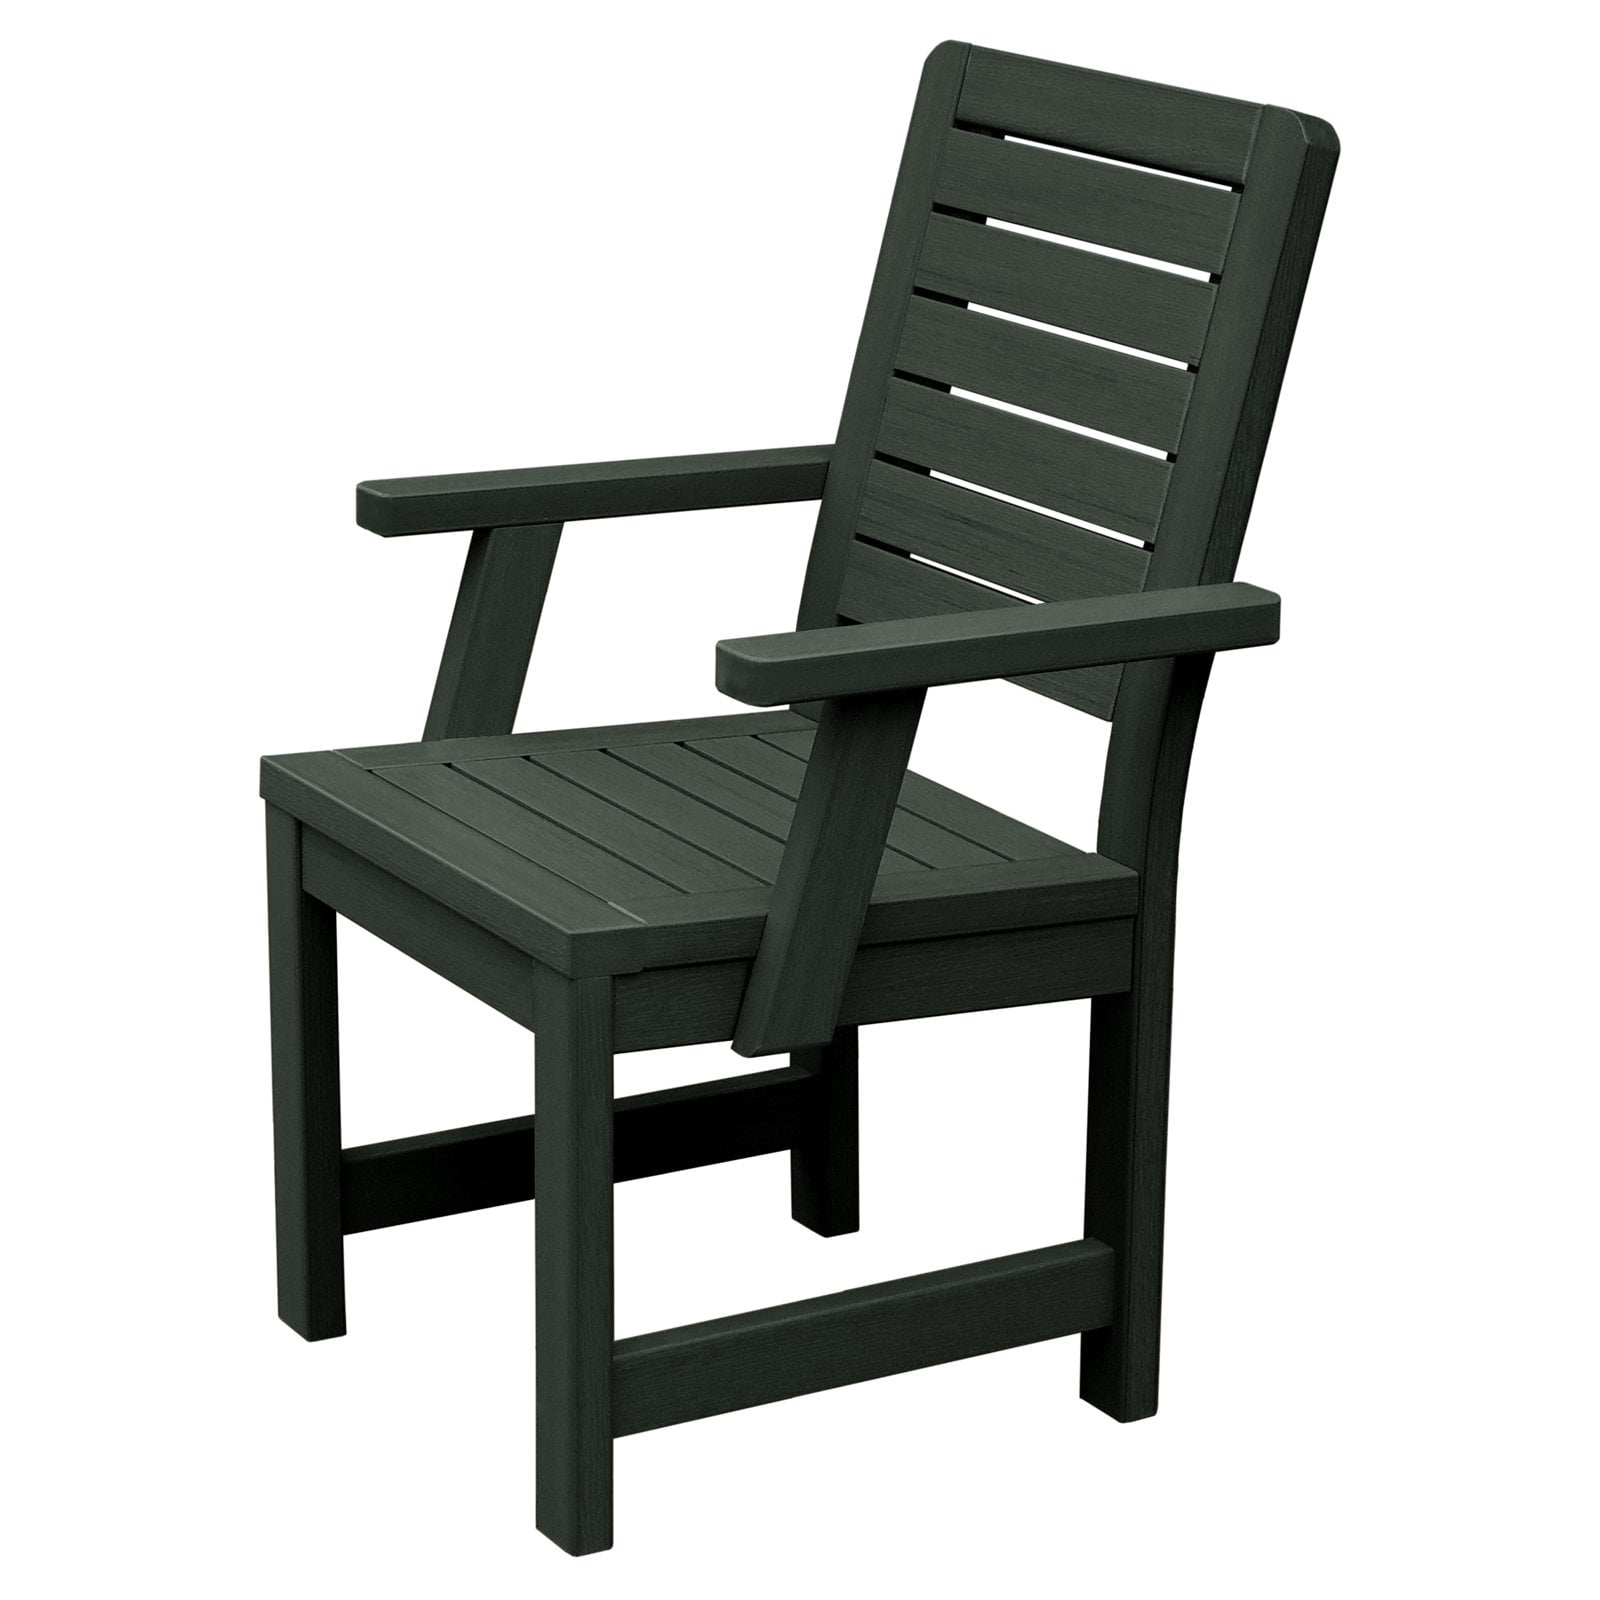 highwood® Weatherly Recycled Plastic Patio Dining Chair - Walmart.com